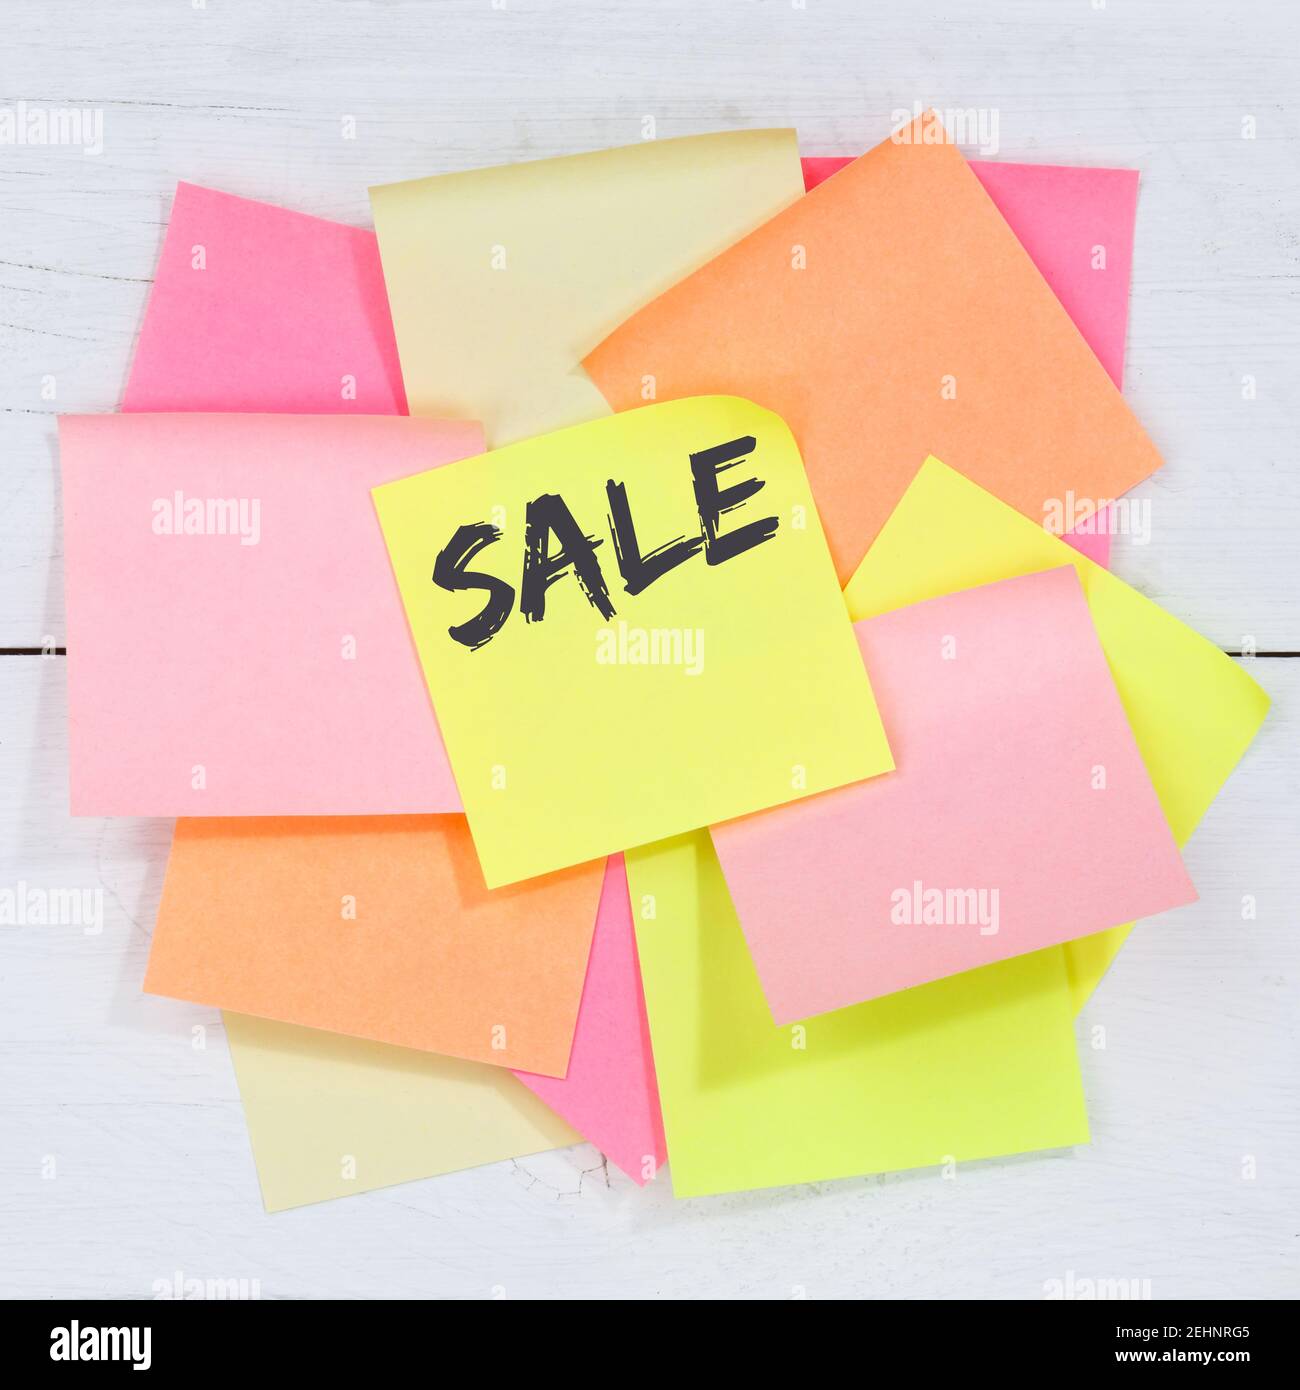 Sale shopping special offer business concept desk note paper notepaper Stock Photo